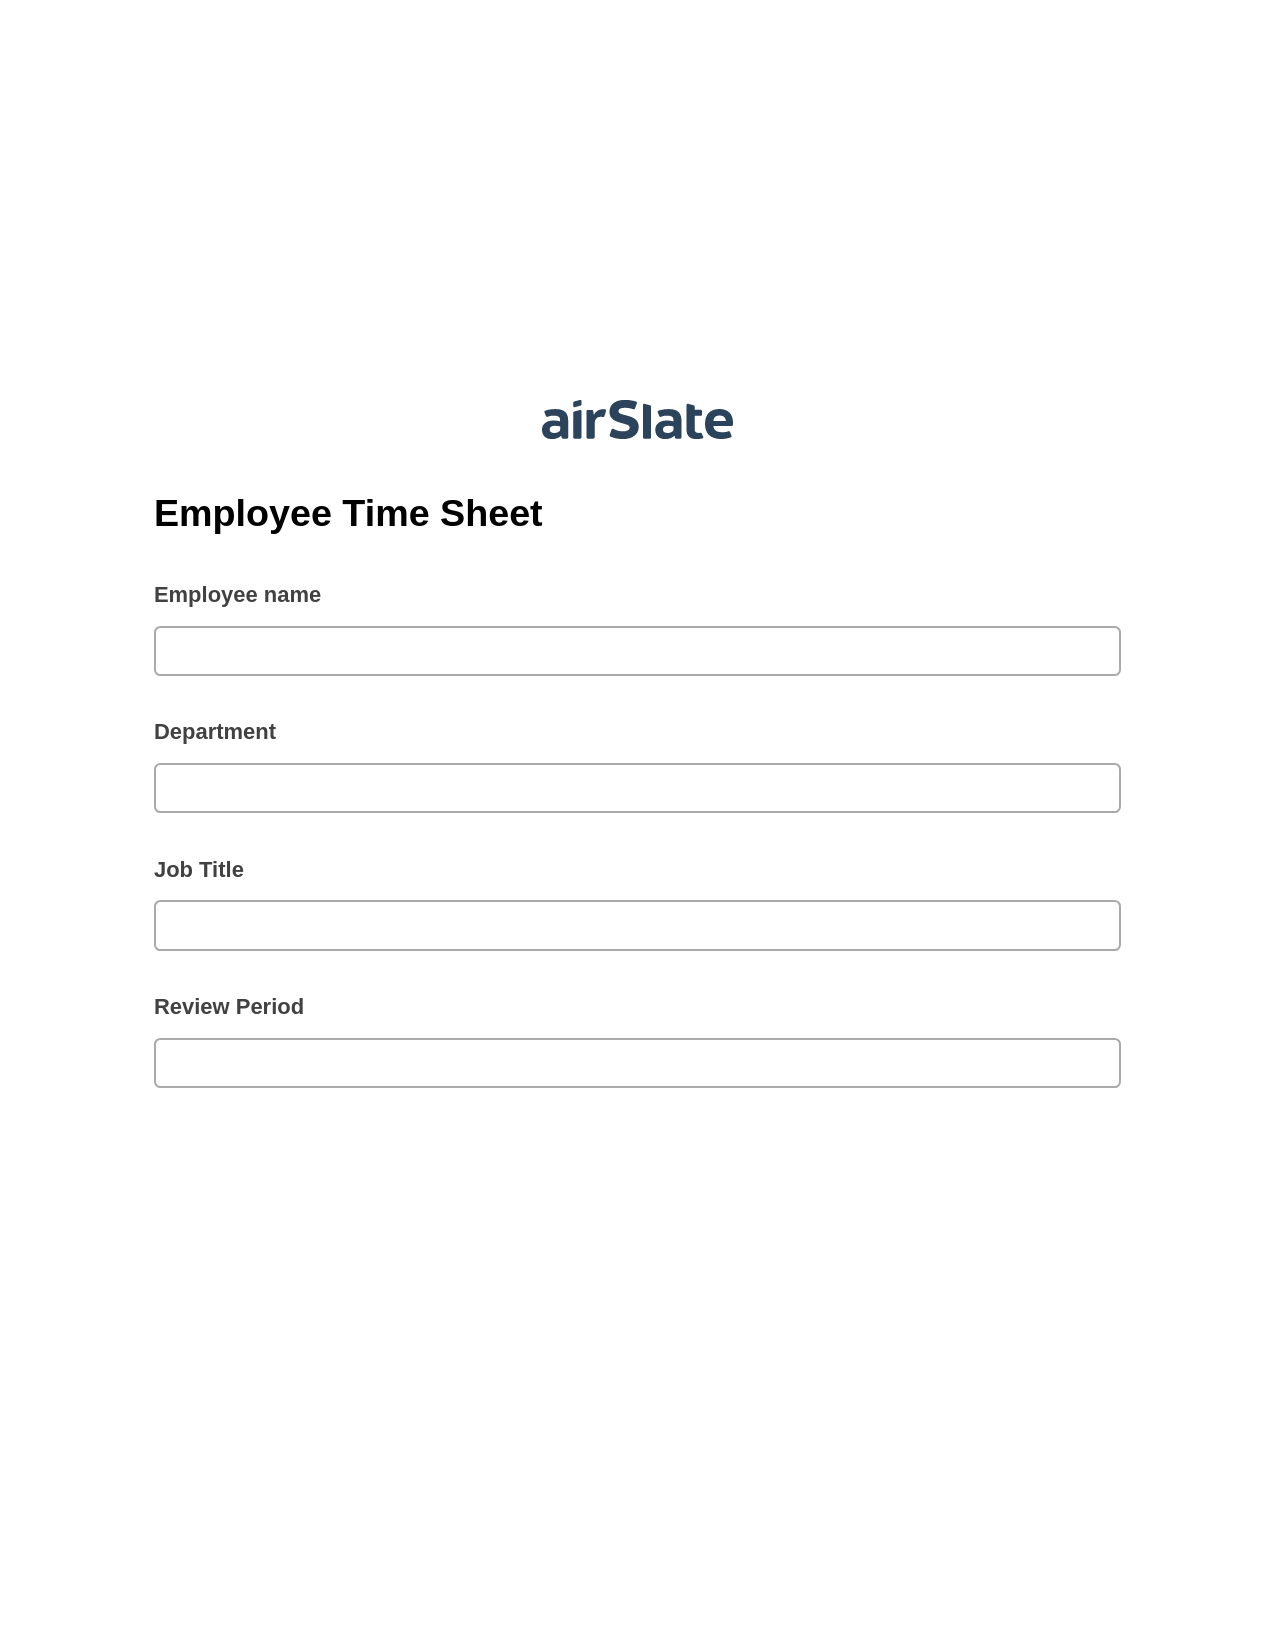 Employee Time Sheet Pre-fill from Salesforce Records Bot, Create Salesforce Records Bot, Export to Salesforce Record Bot